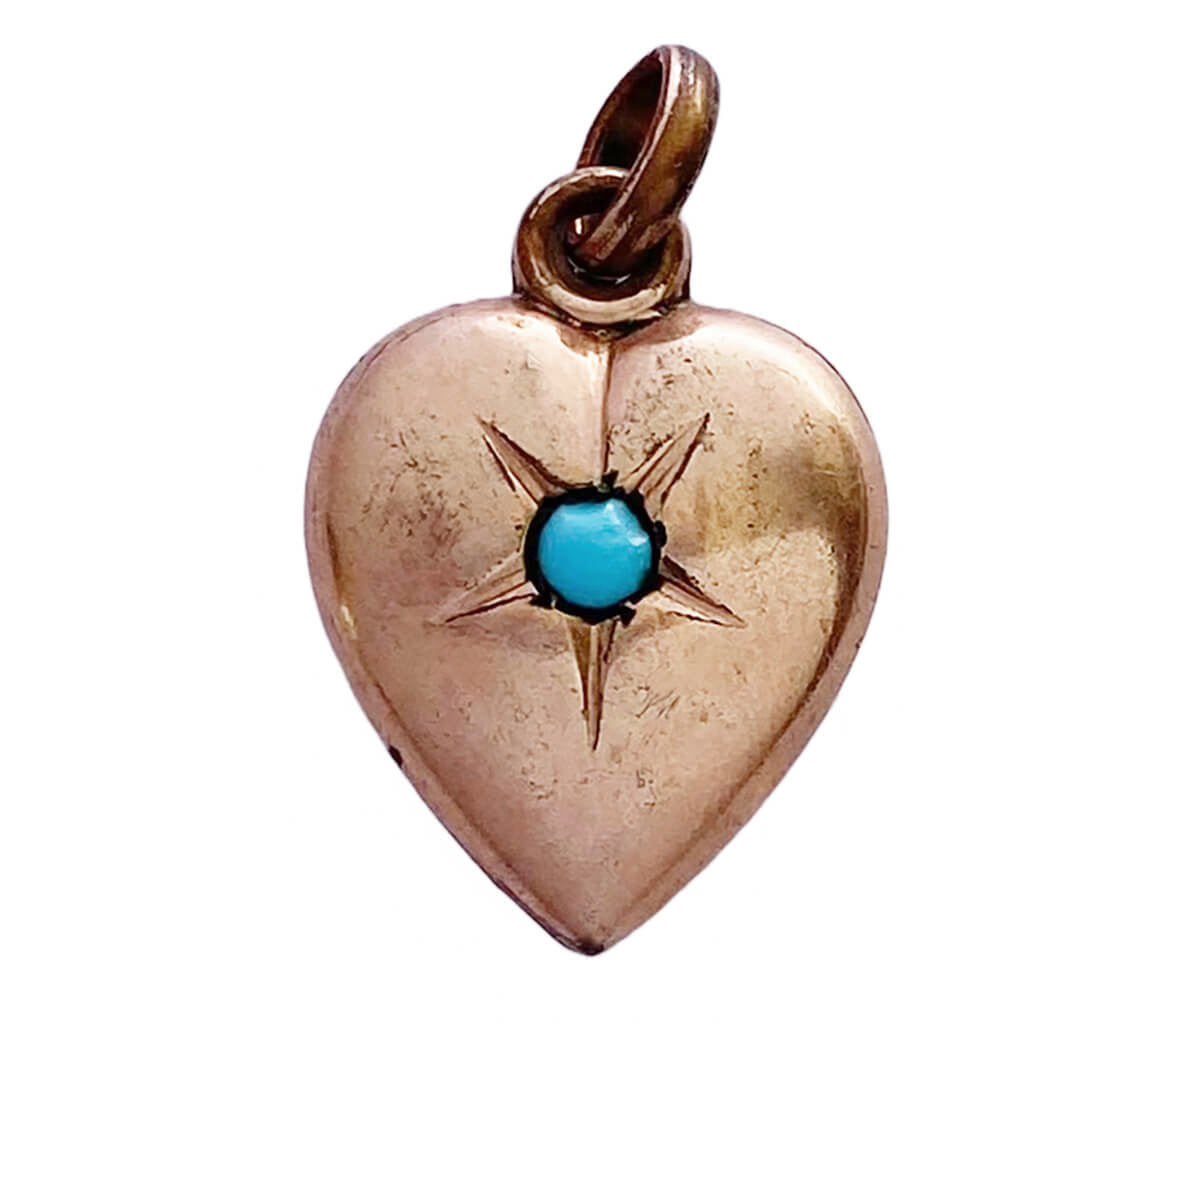 Vintage gold plated heart charm